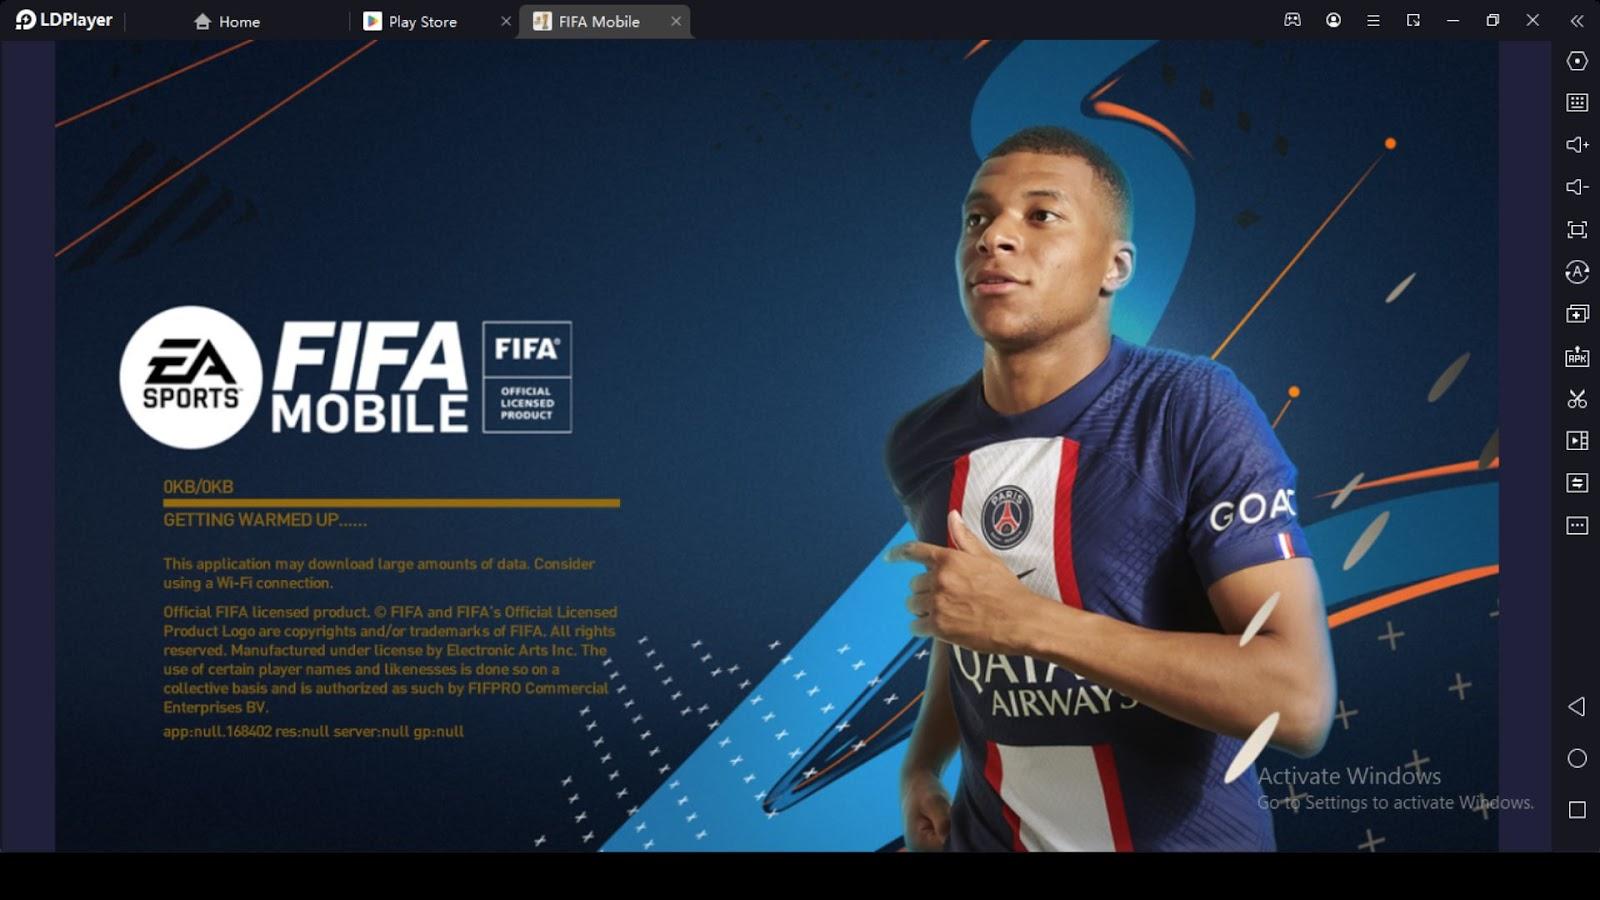 Google has a FIFA World Cup 2022 mini-game on mobiles: Here's how